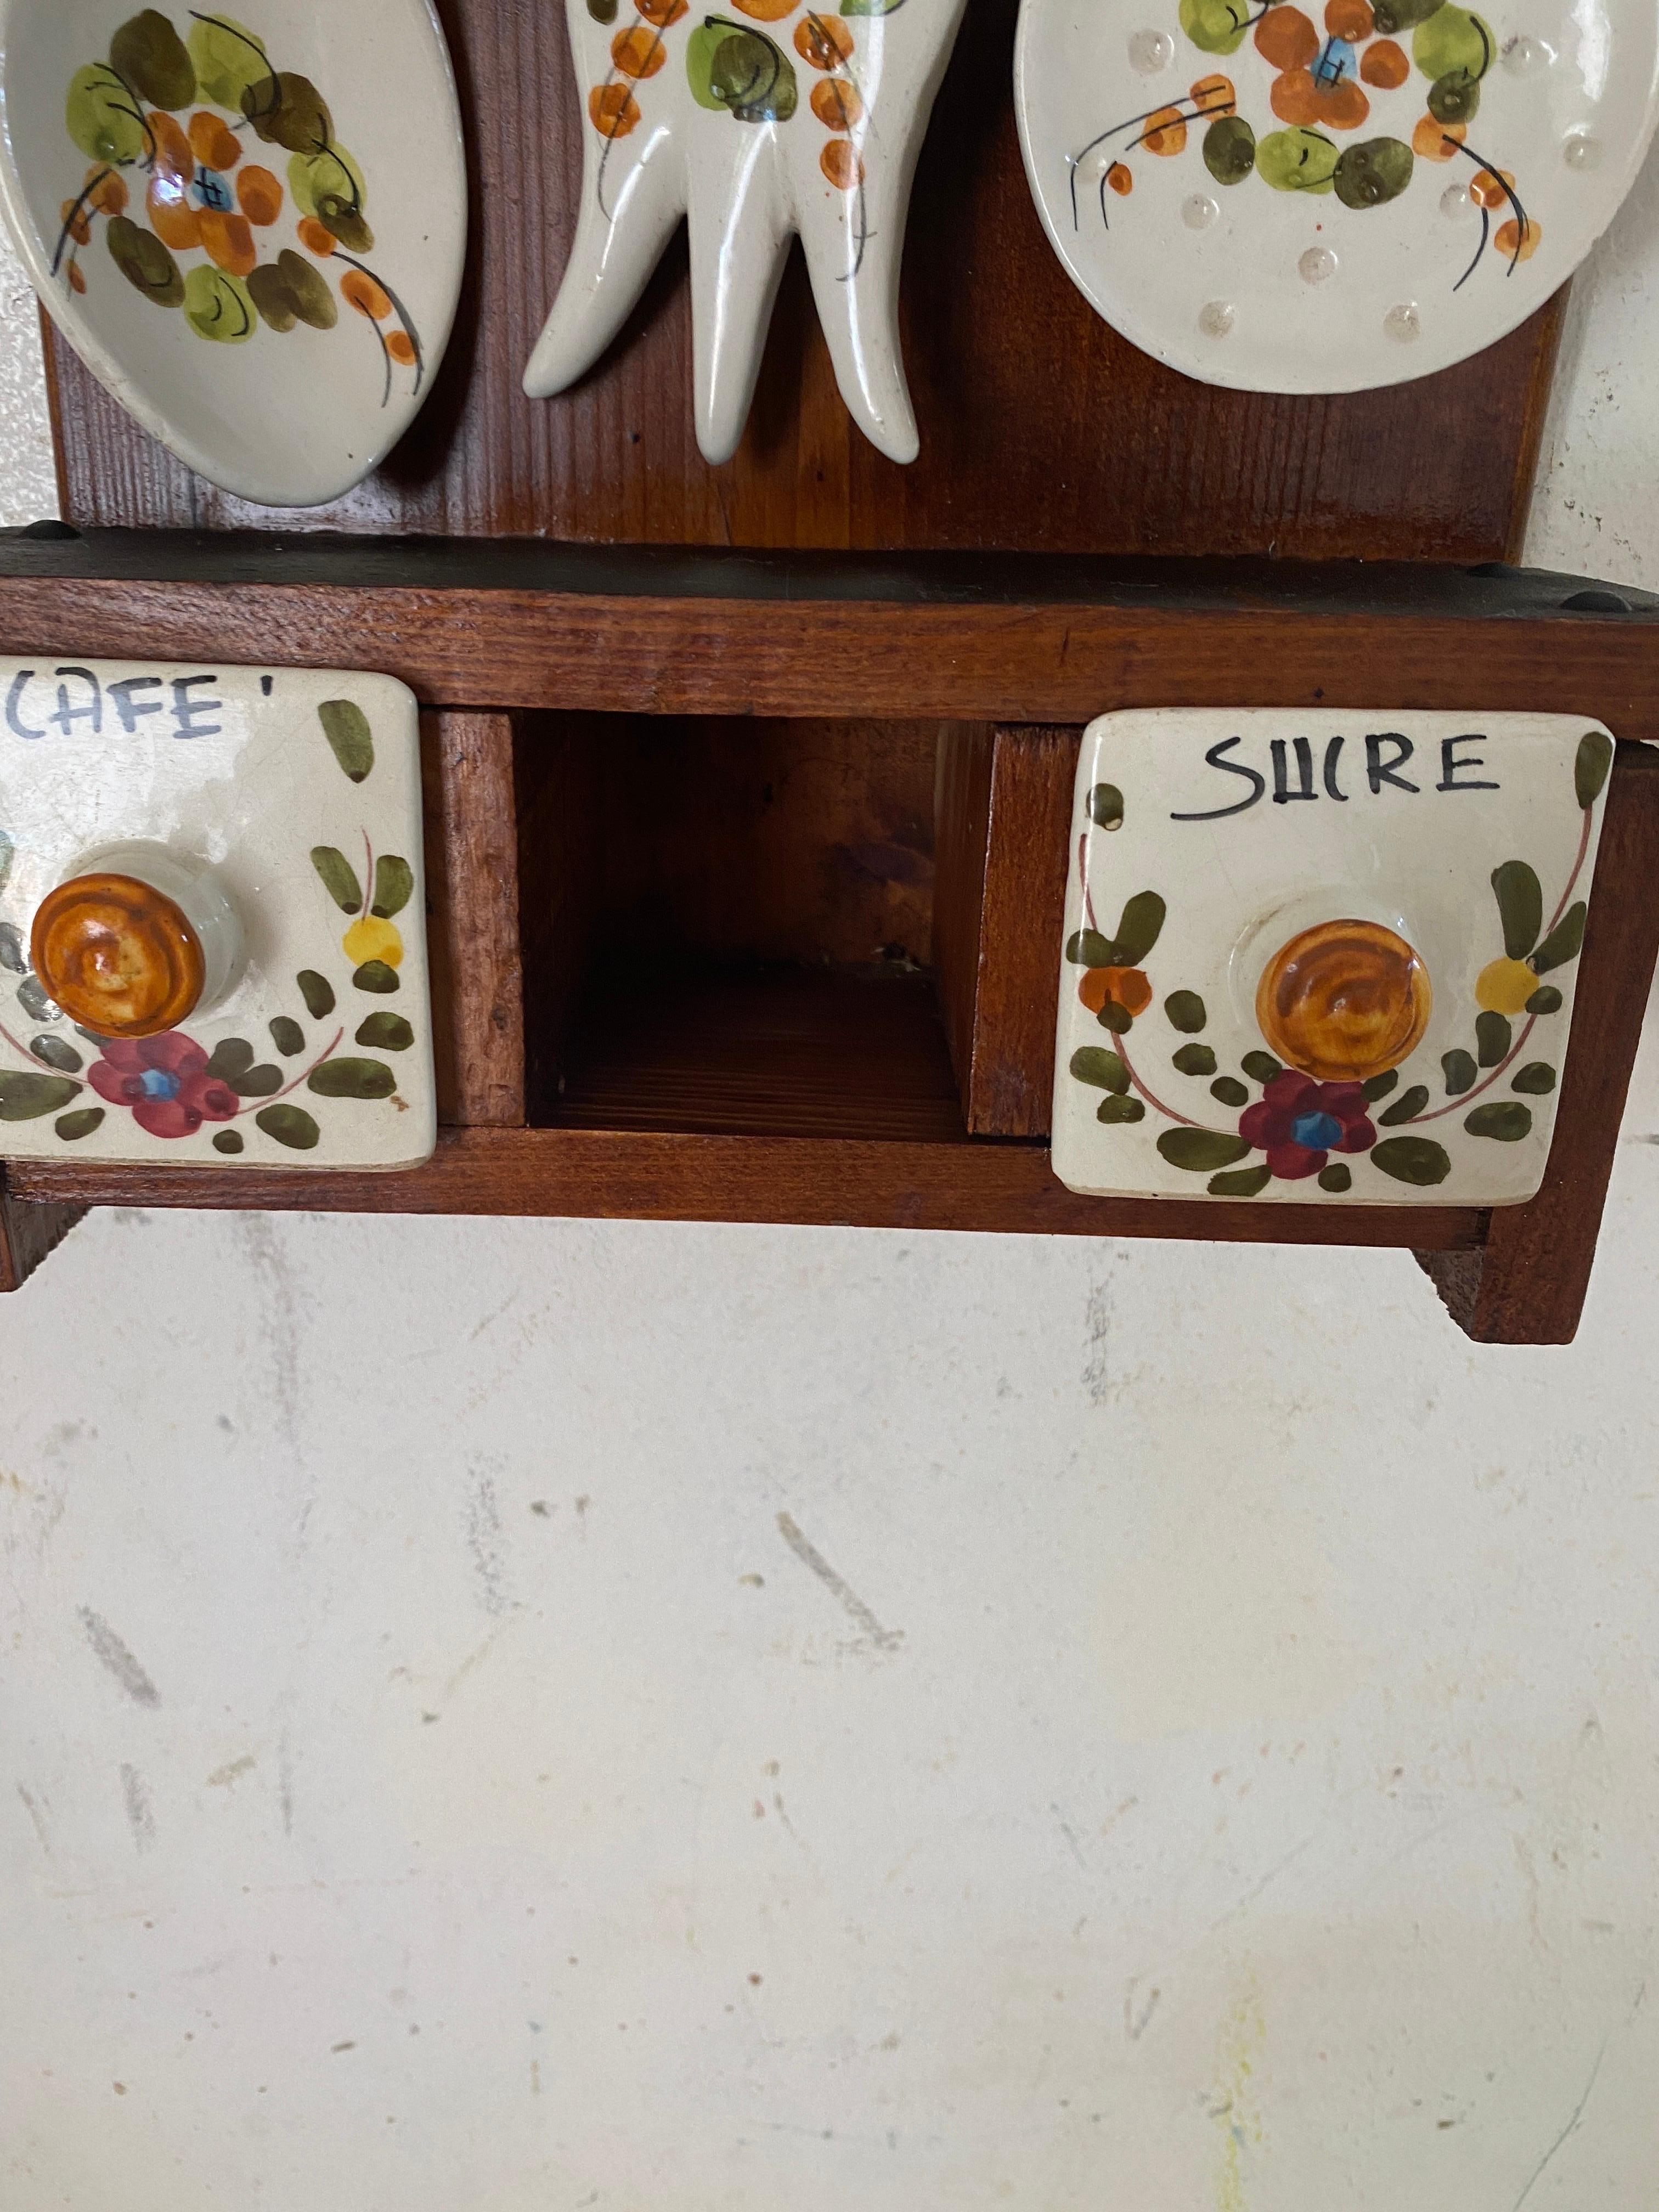 Salt Sugar and Coffee Boxes Kitchen wall set in Ceramic and Wood France 1960 For Sale 1